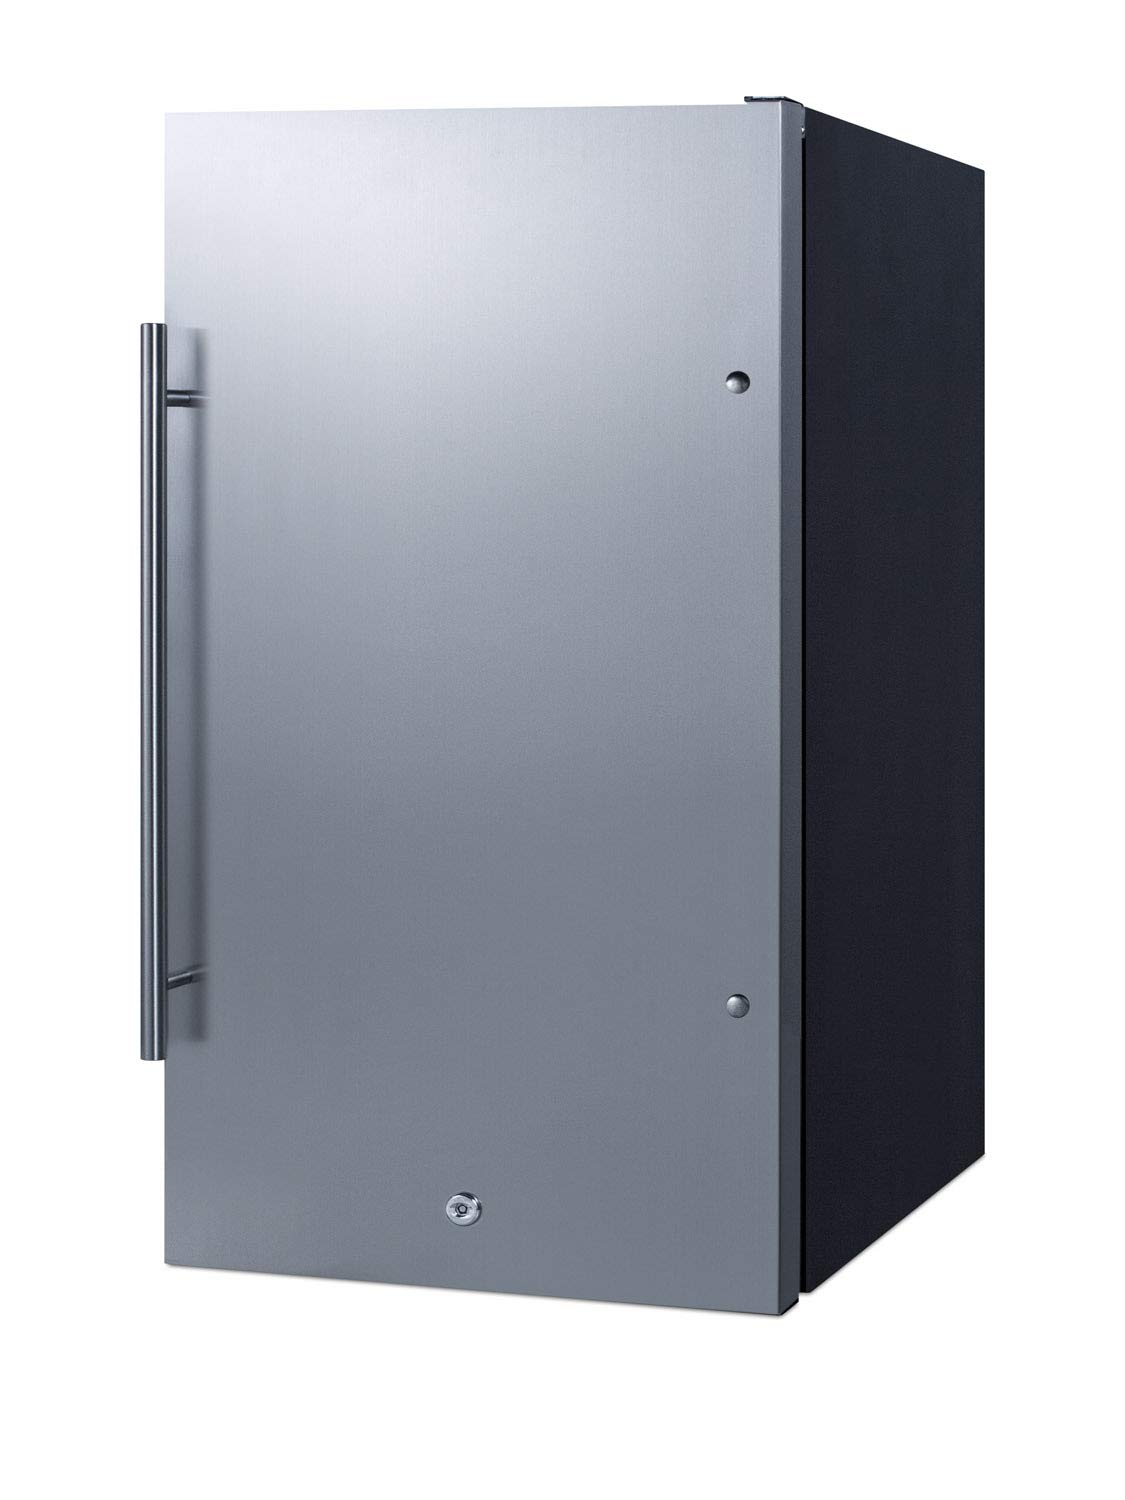 Summit Appliance FF195 Commercially Approved ENERGY STAR Certified 19